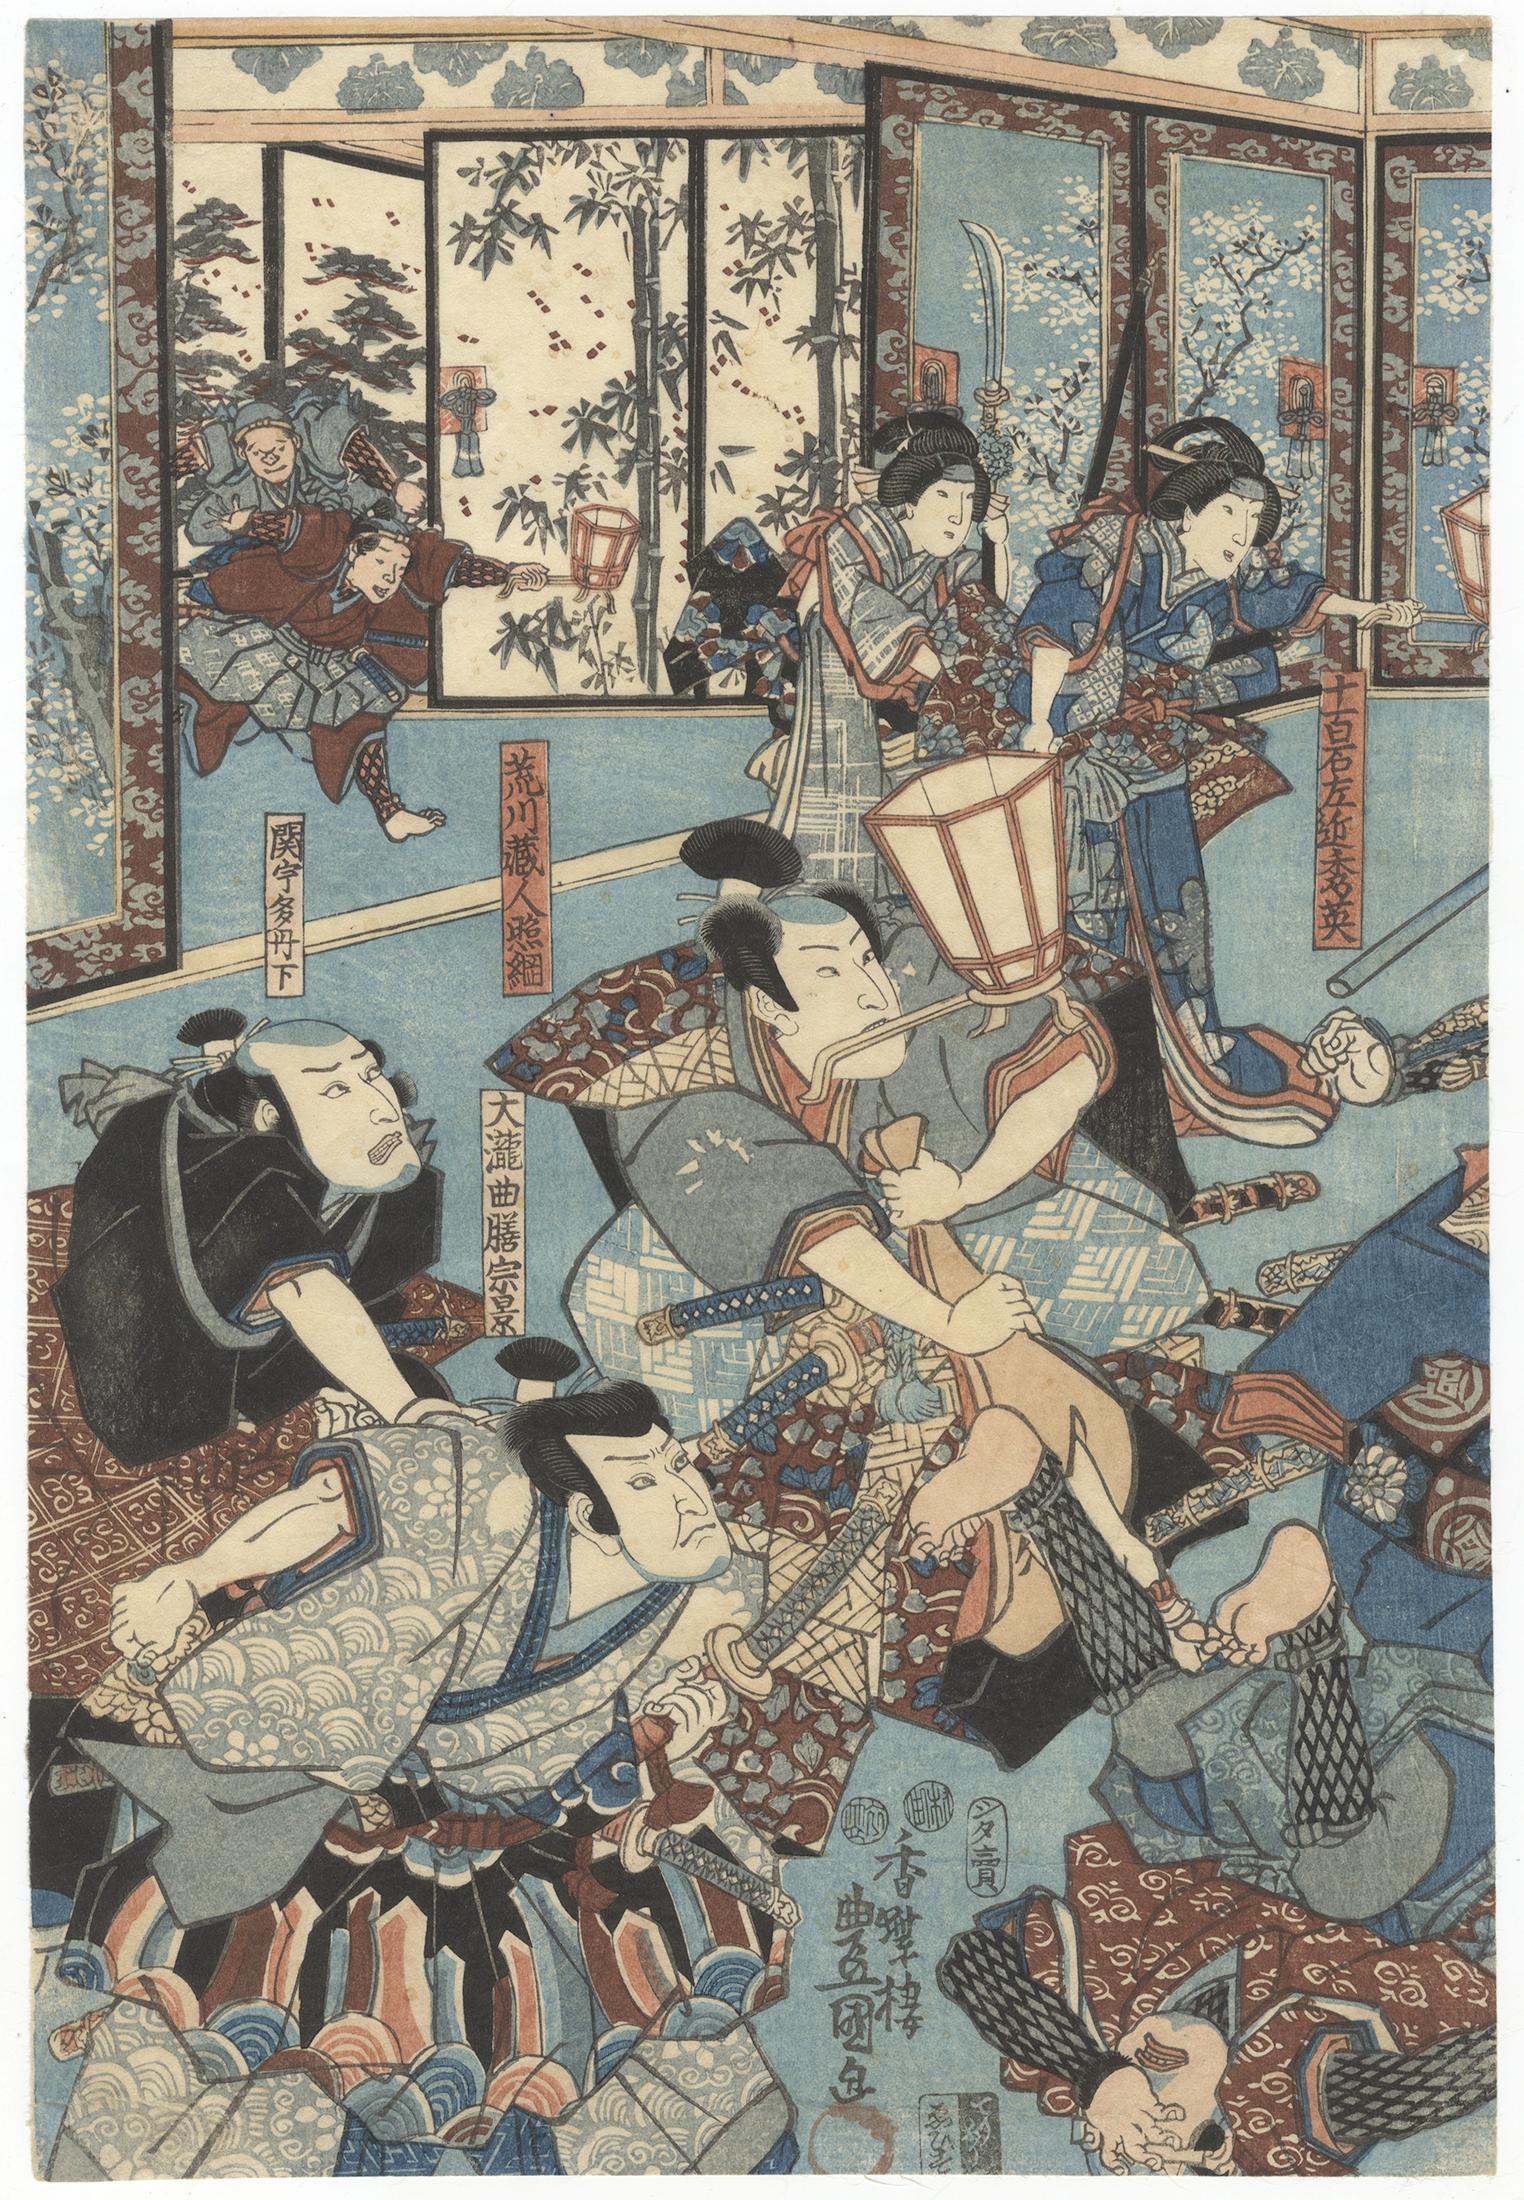 Known throughout Japan as a Robin Hood figure, Ishikawa Goemon (c.1558-1594) is arguably the nation's most famous outlaws. Although historical documentation is scarce, Goemon's exploits during the Warring States period have been adapted and